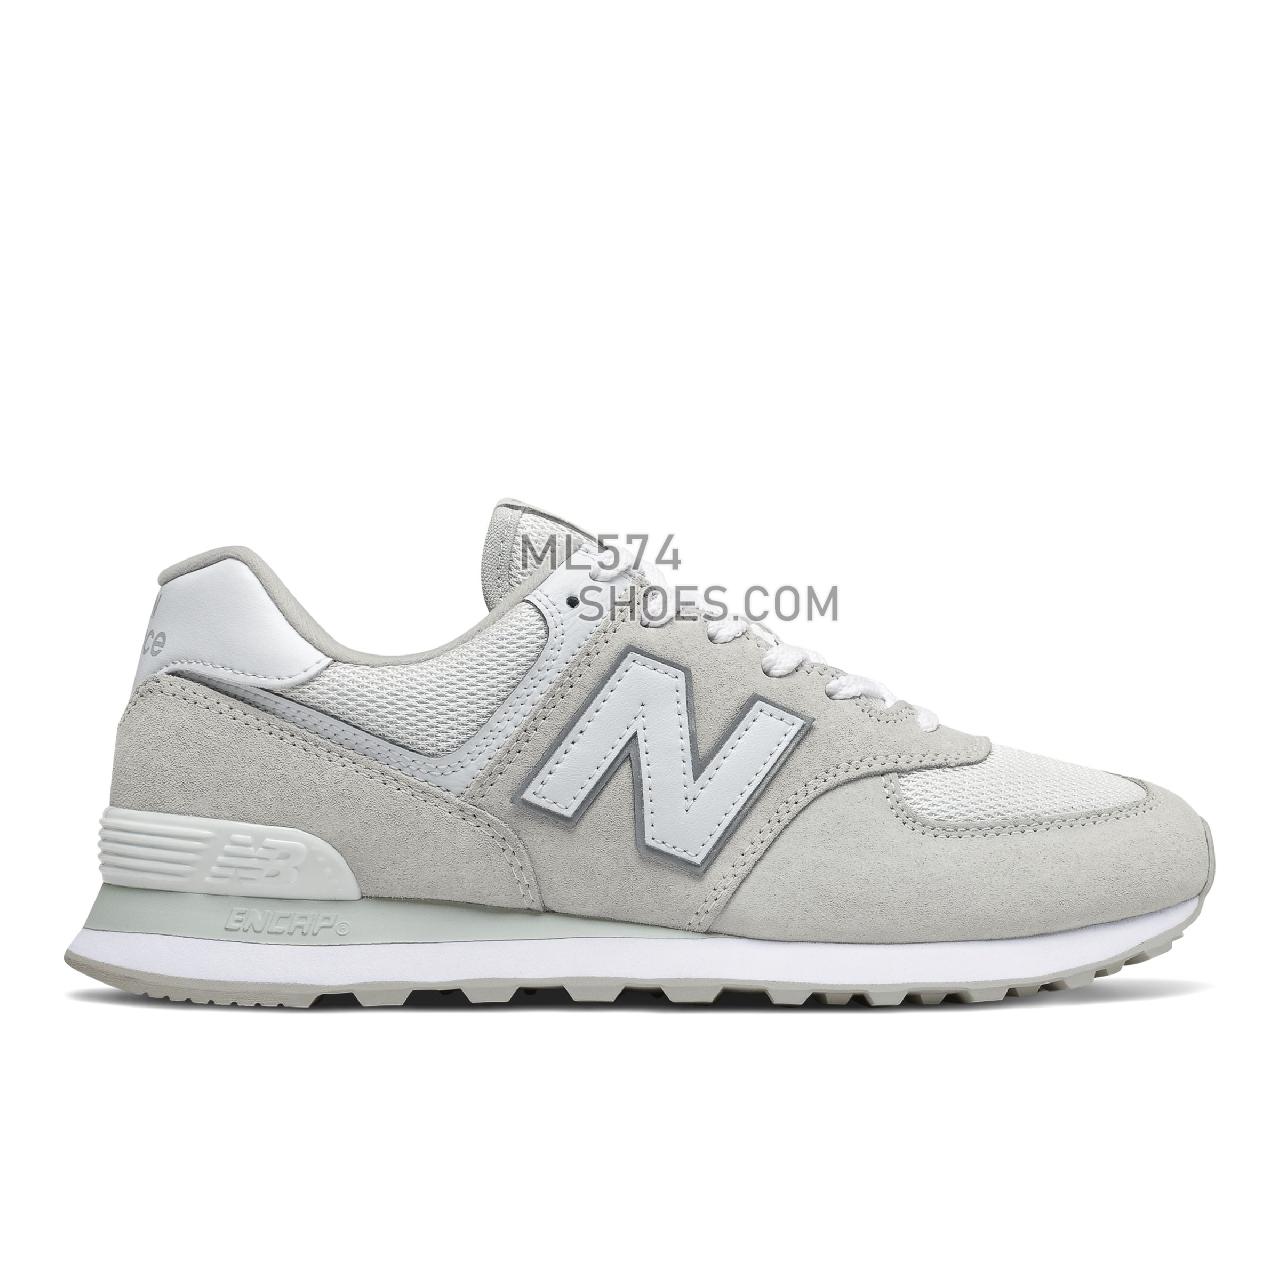 New Balance 574v2 - Men's Classic Sneakers - Summer Fog with White - ML574ES2